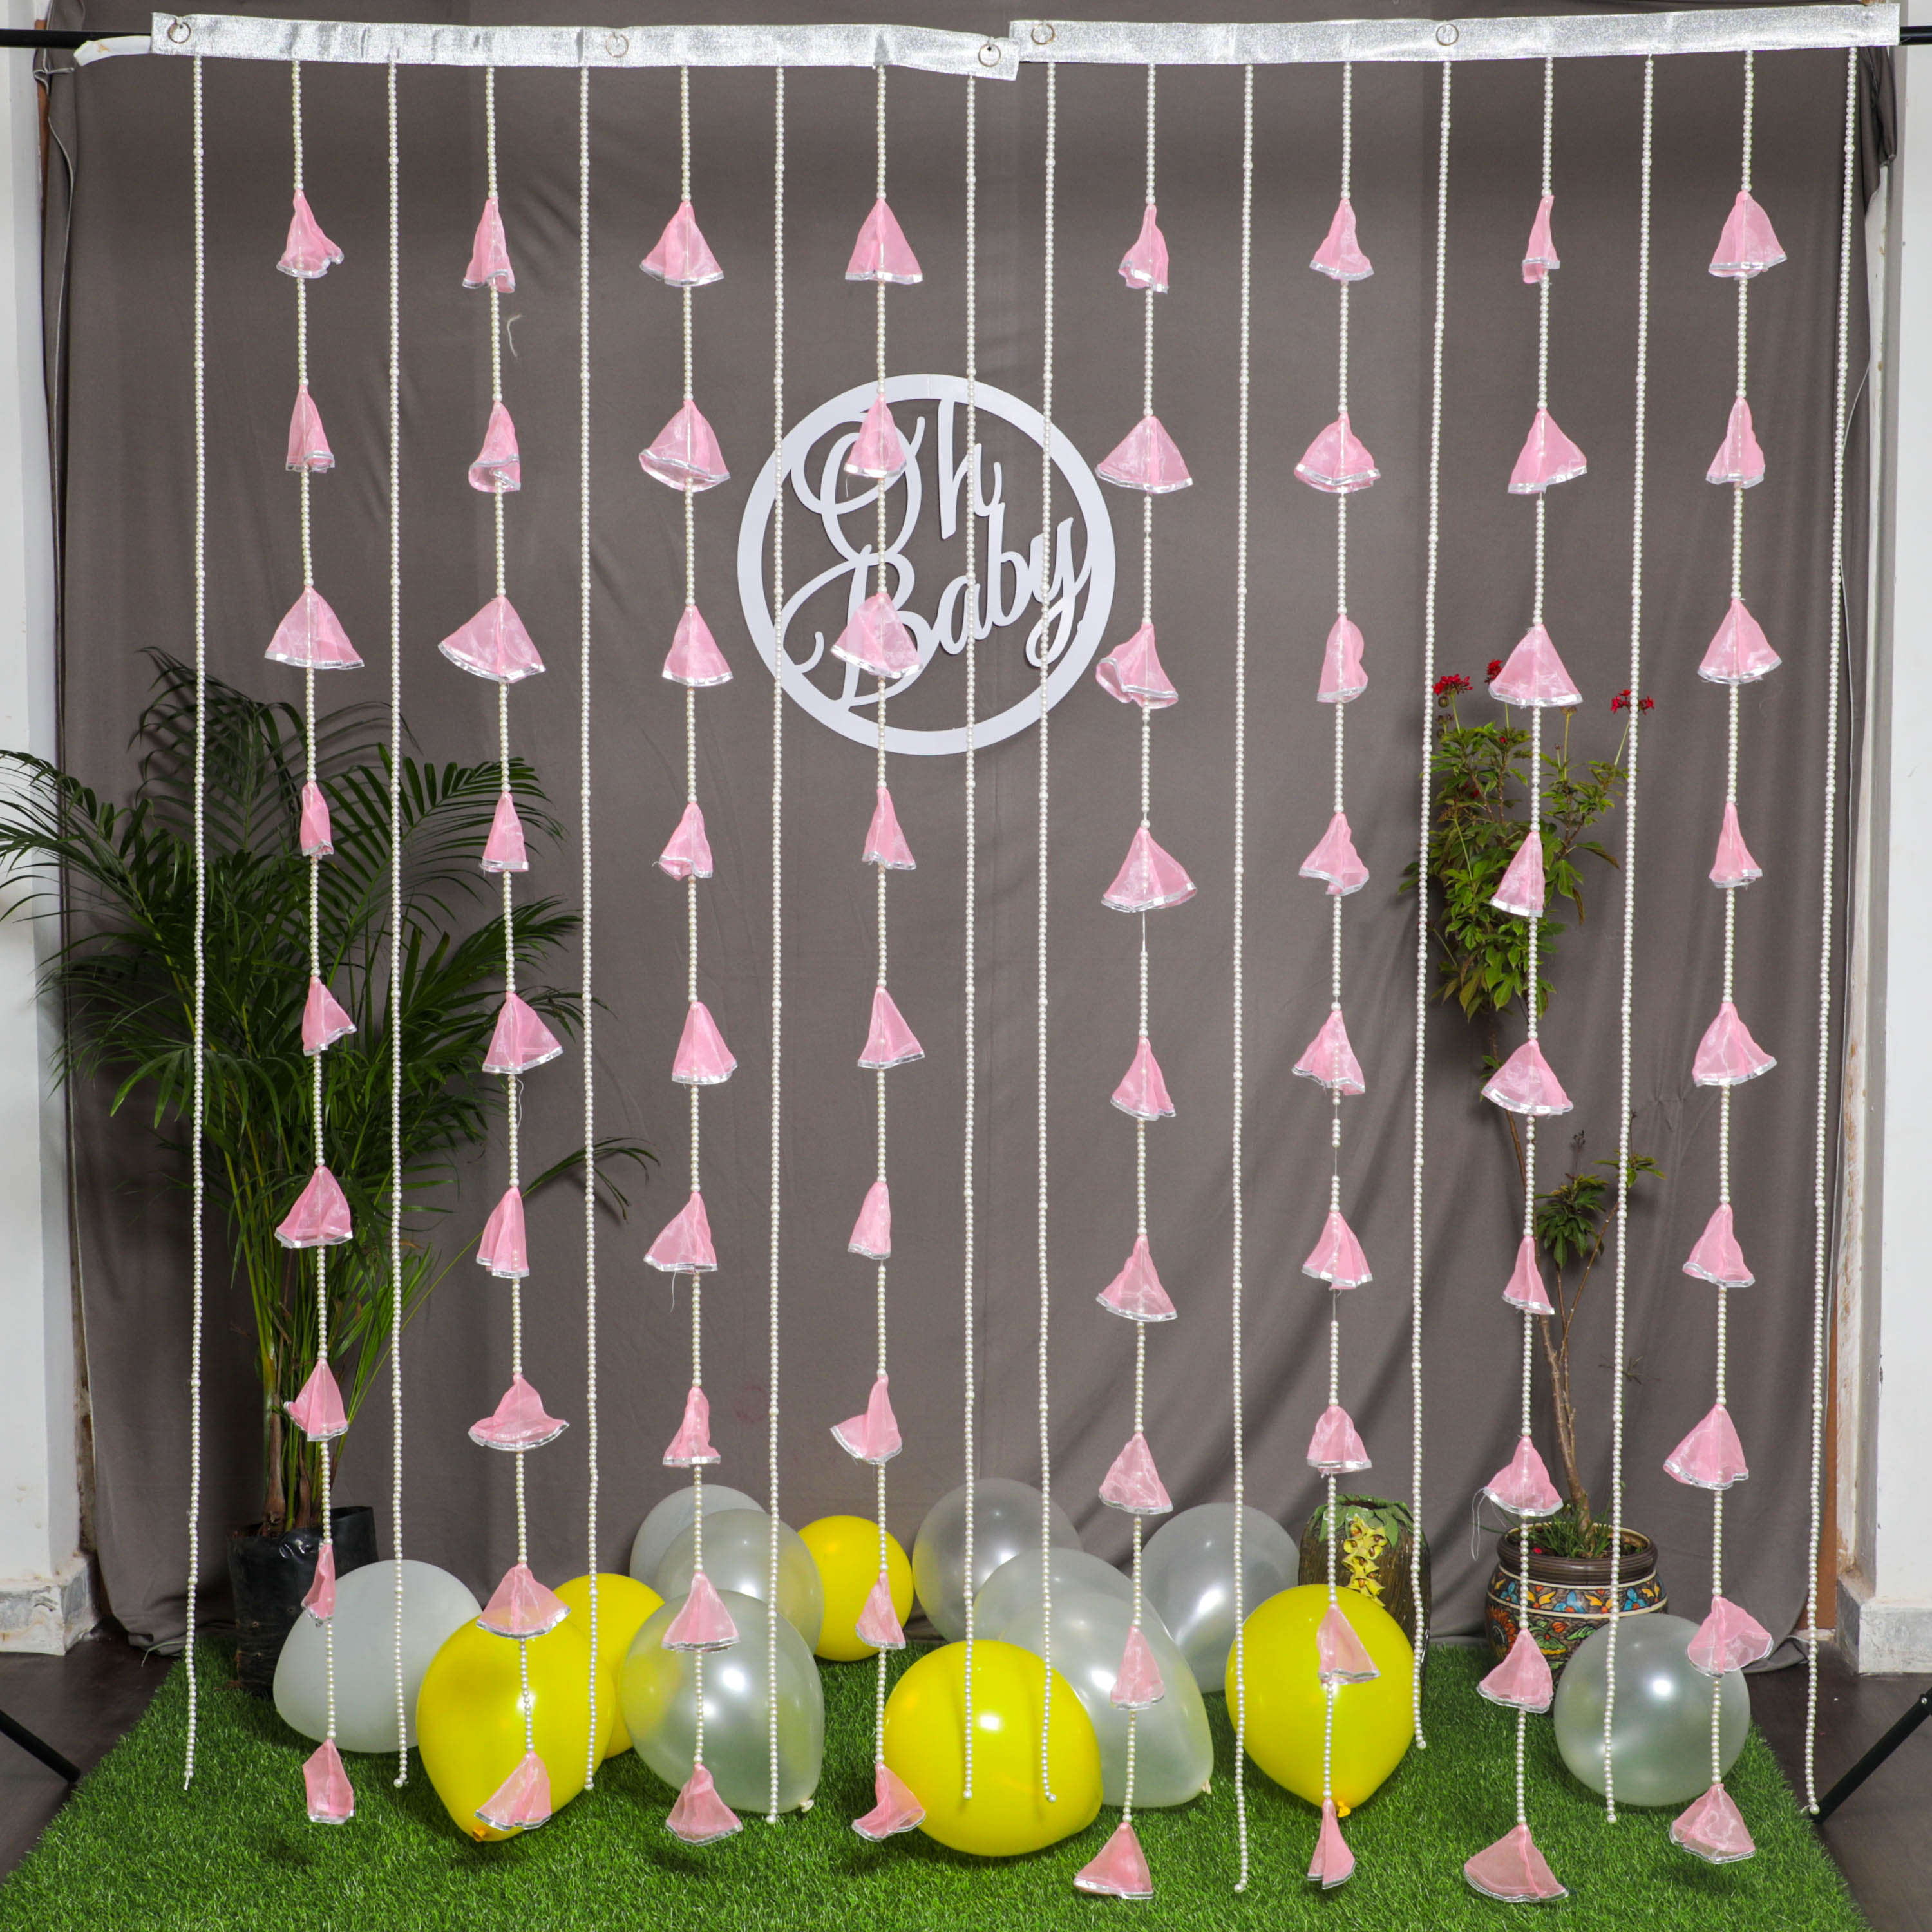 Decorative curtains for birthday parties